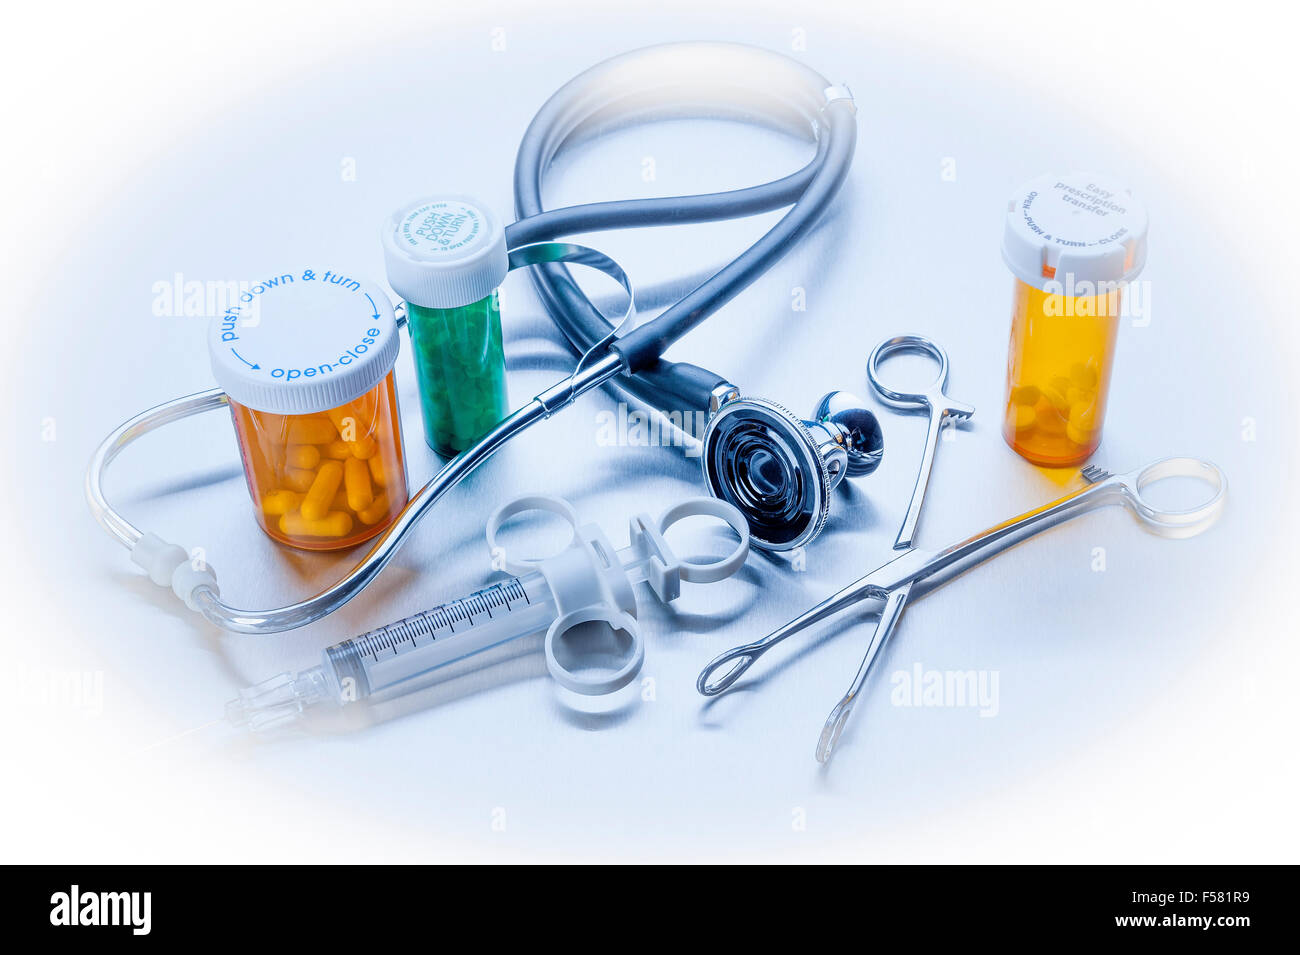 Healthcare medical objects in blue Stock Photo